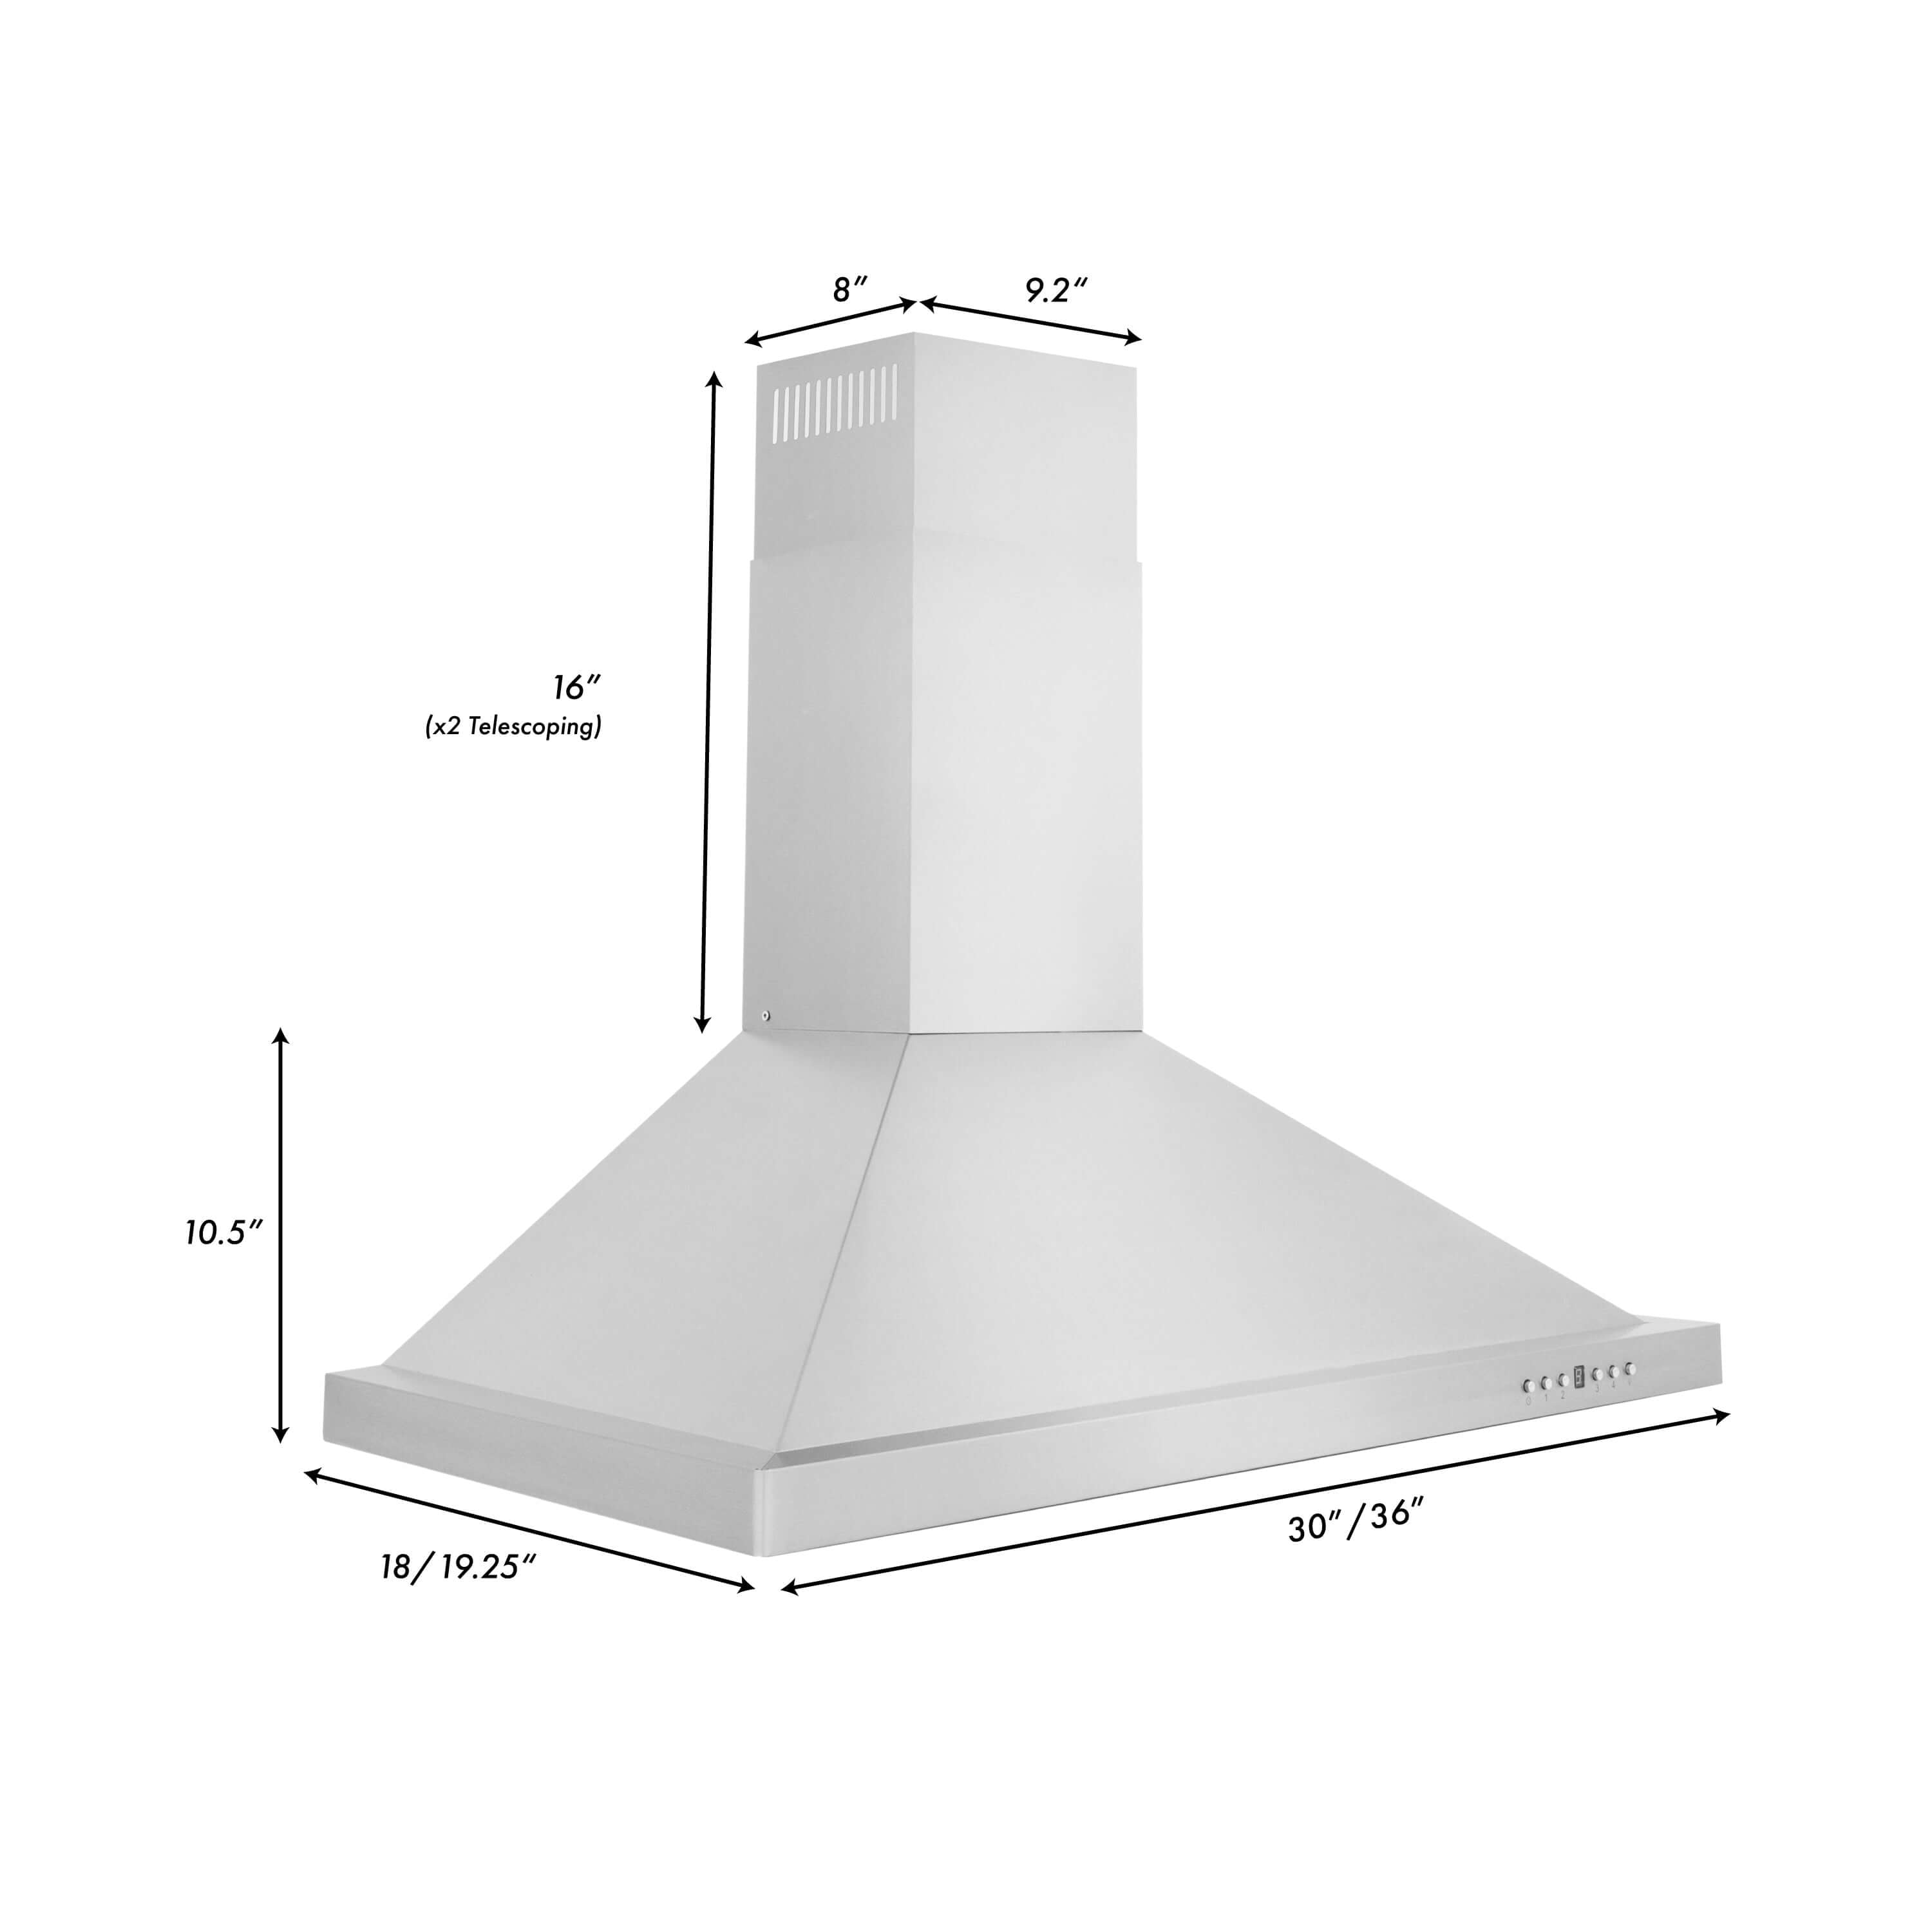 ZLINE 30 in. Kitchen Package with Stainless Steel Gas Range and Convertible Vent Range Hood (2KP-SGRRH30) dimensional diagram with measurements.